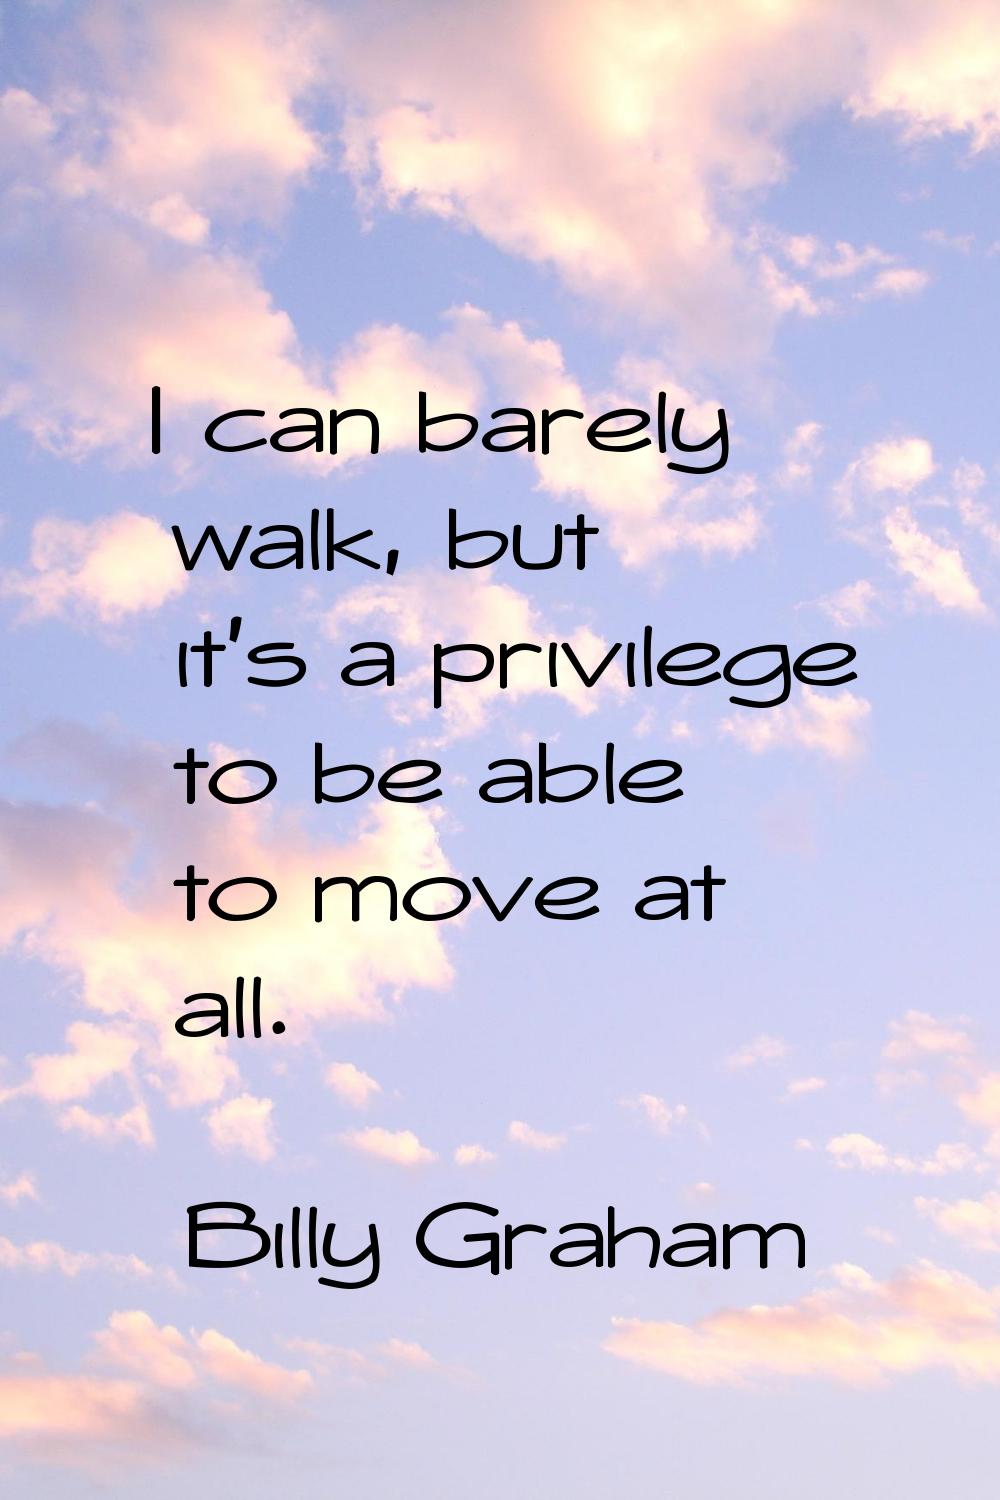 I can barely walk, but it's a privilege to be able to move at all.